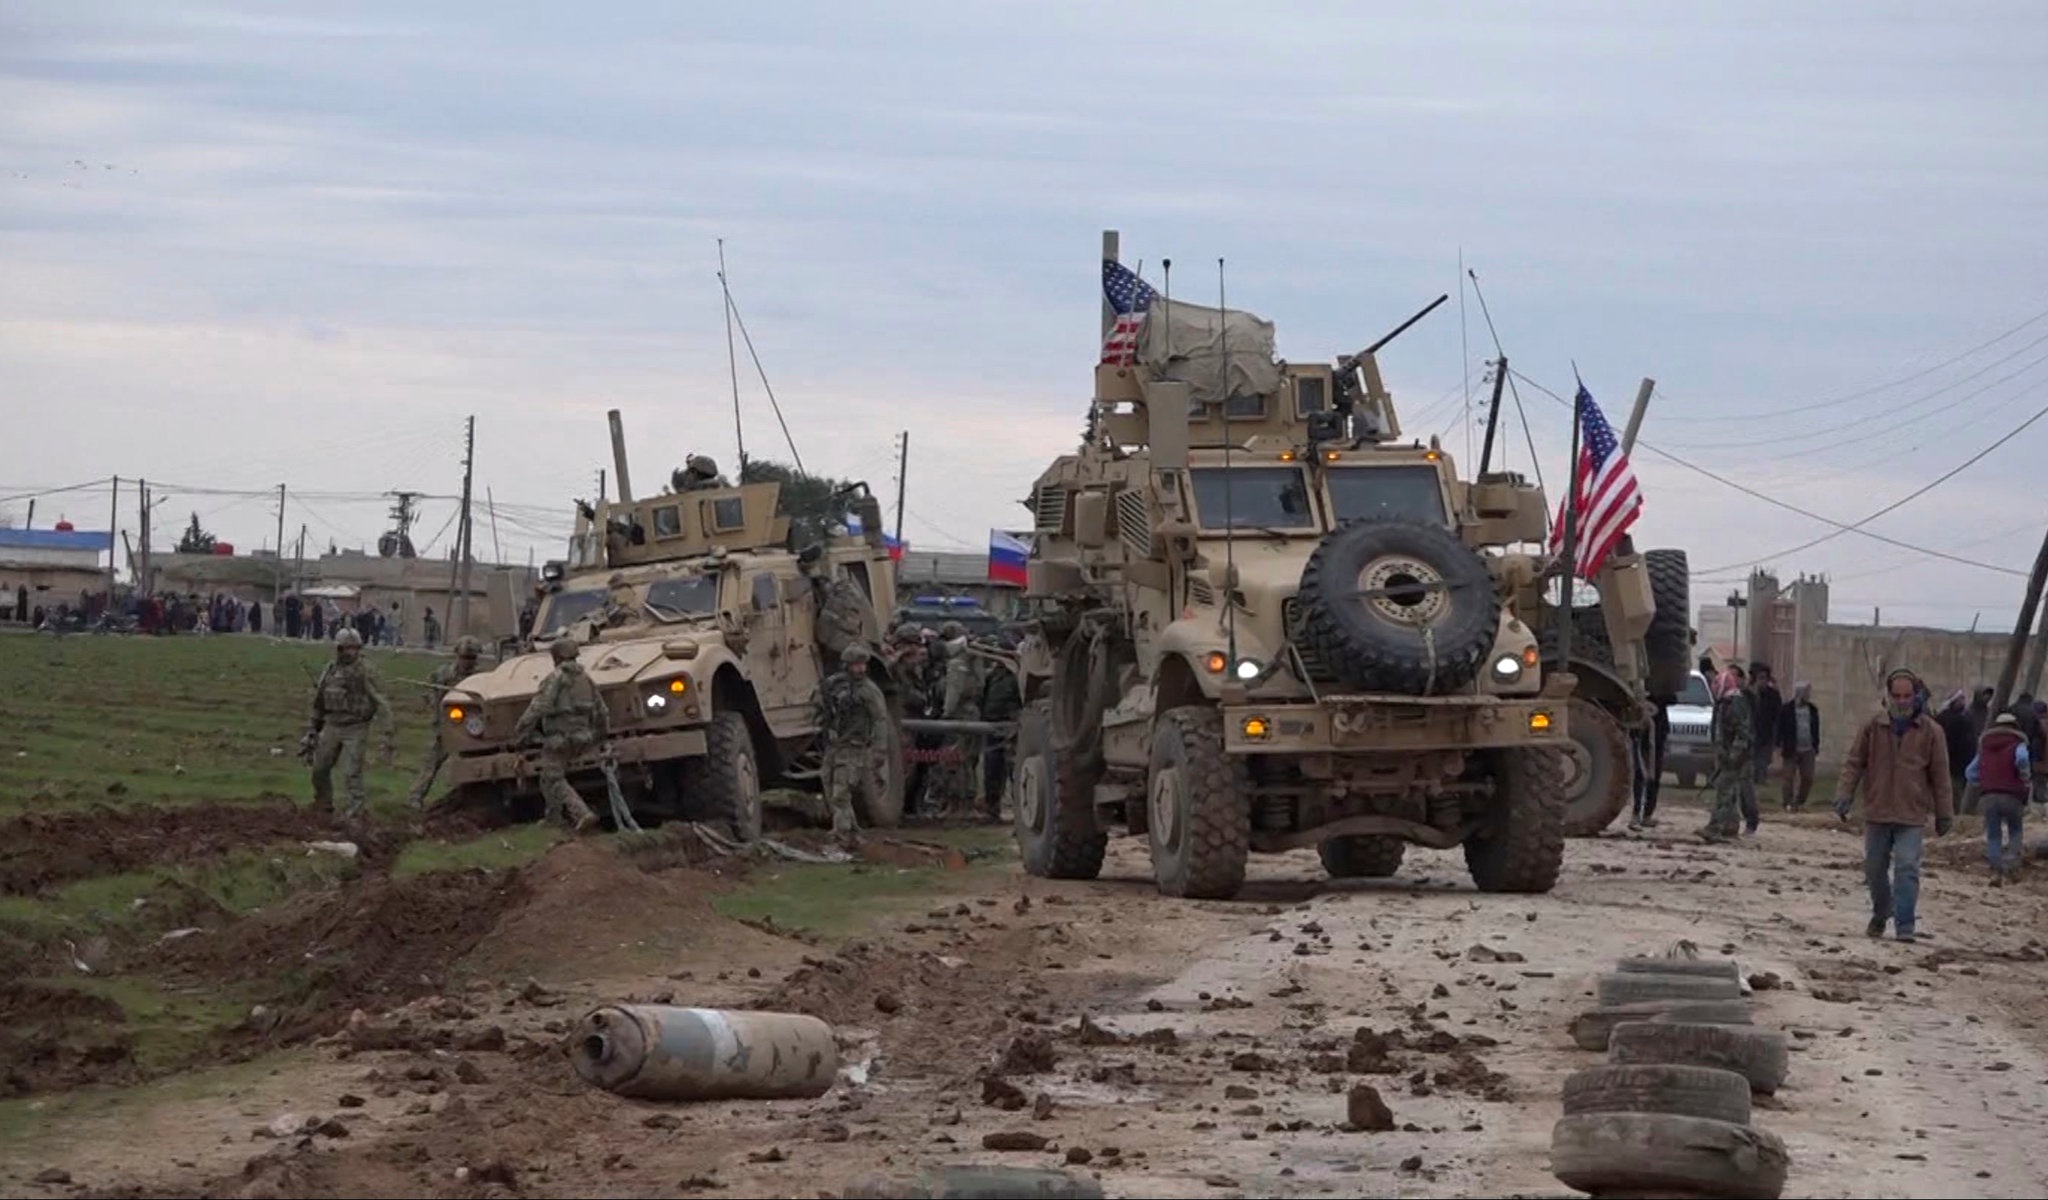 Russian forces stop and turn back U.S. military convoy in Syria